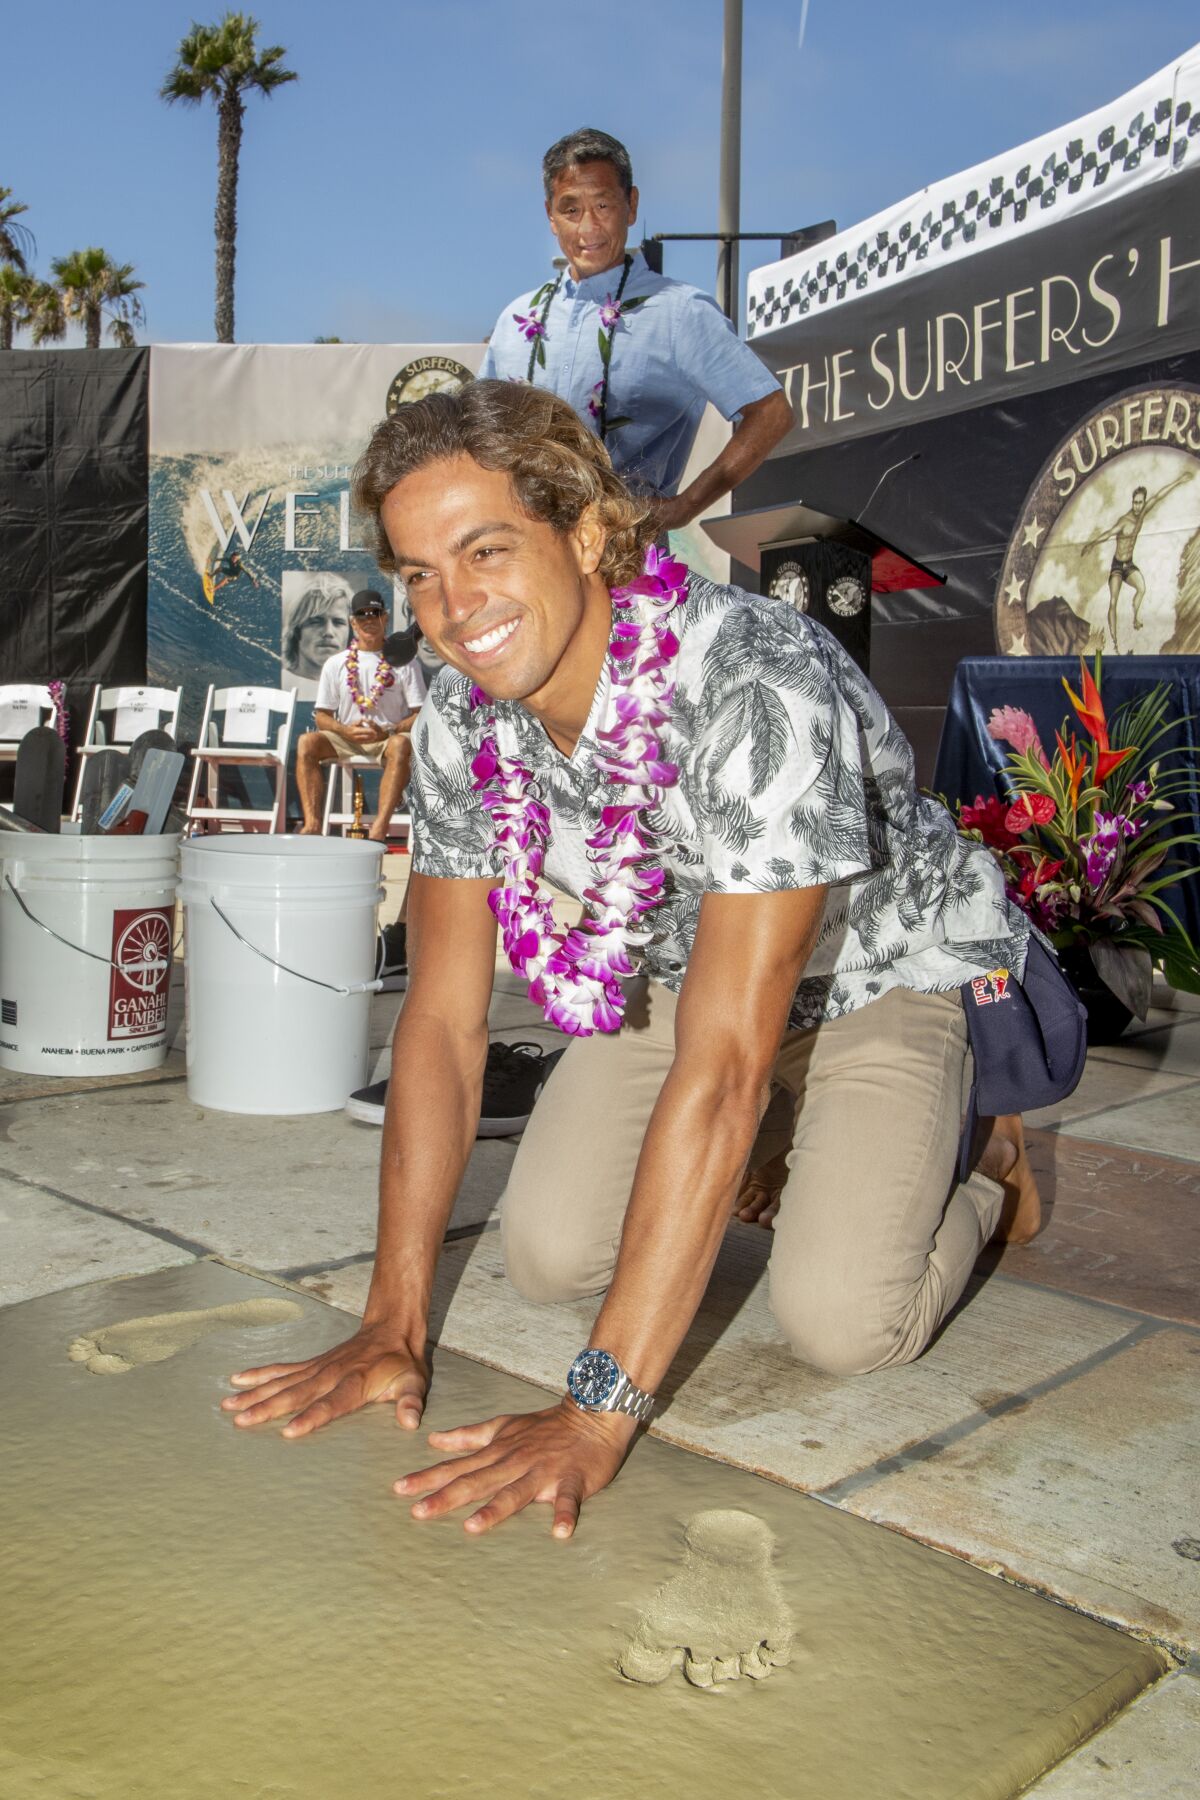 Kai Lenny plants his handprints in wet cement during his induction into the Surfers' Hall of Fame.